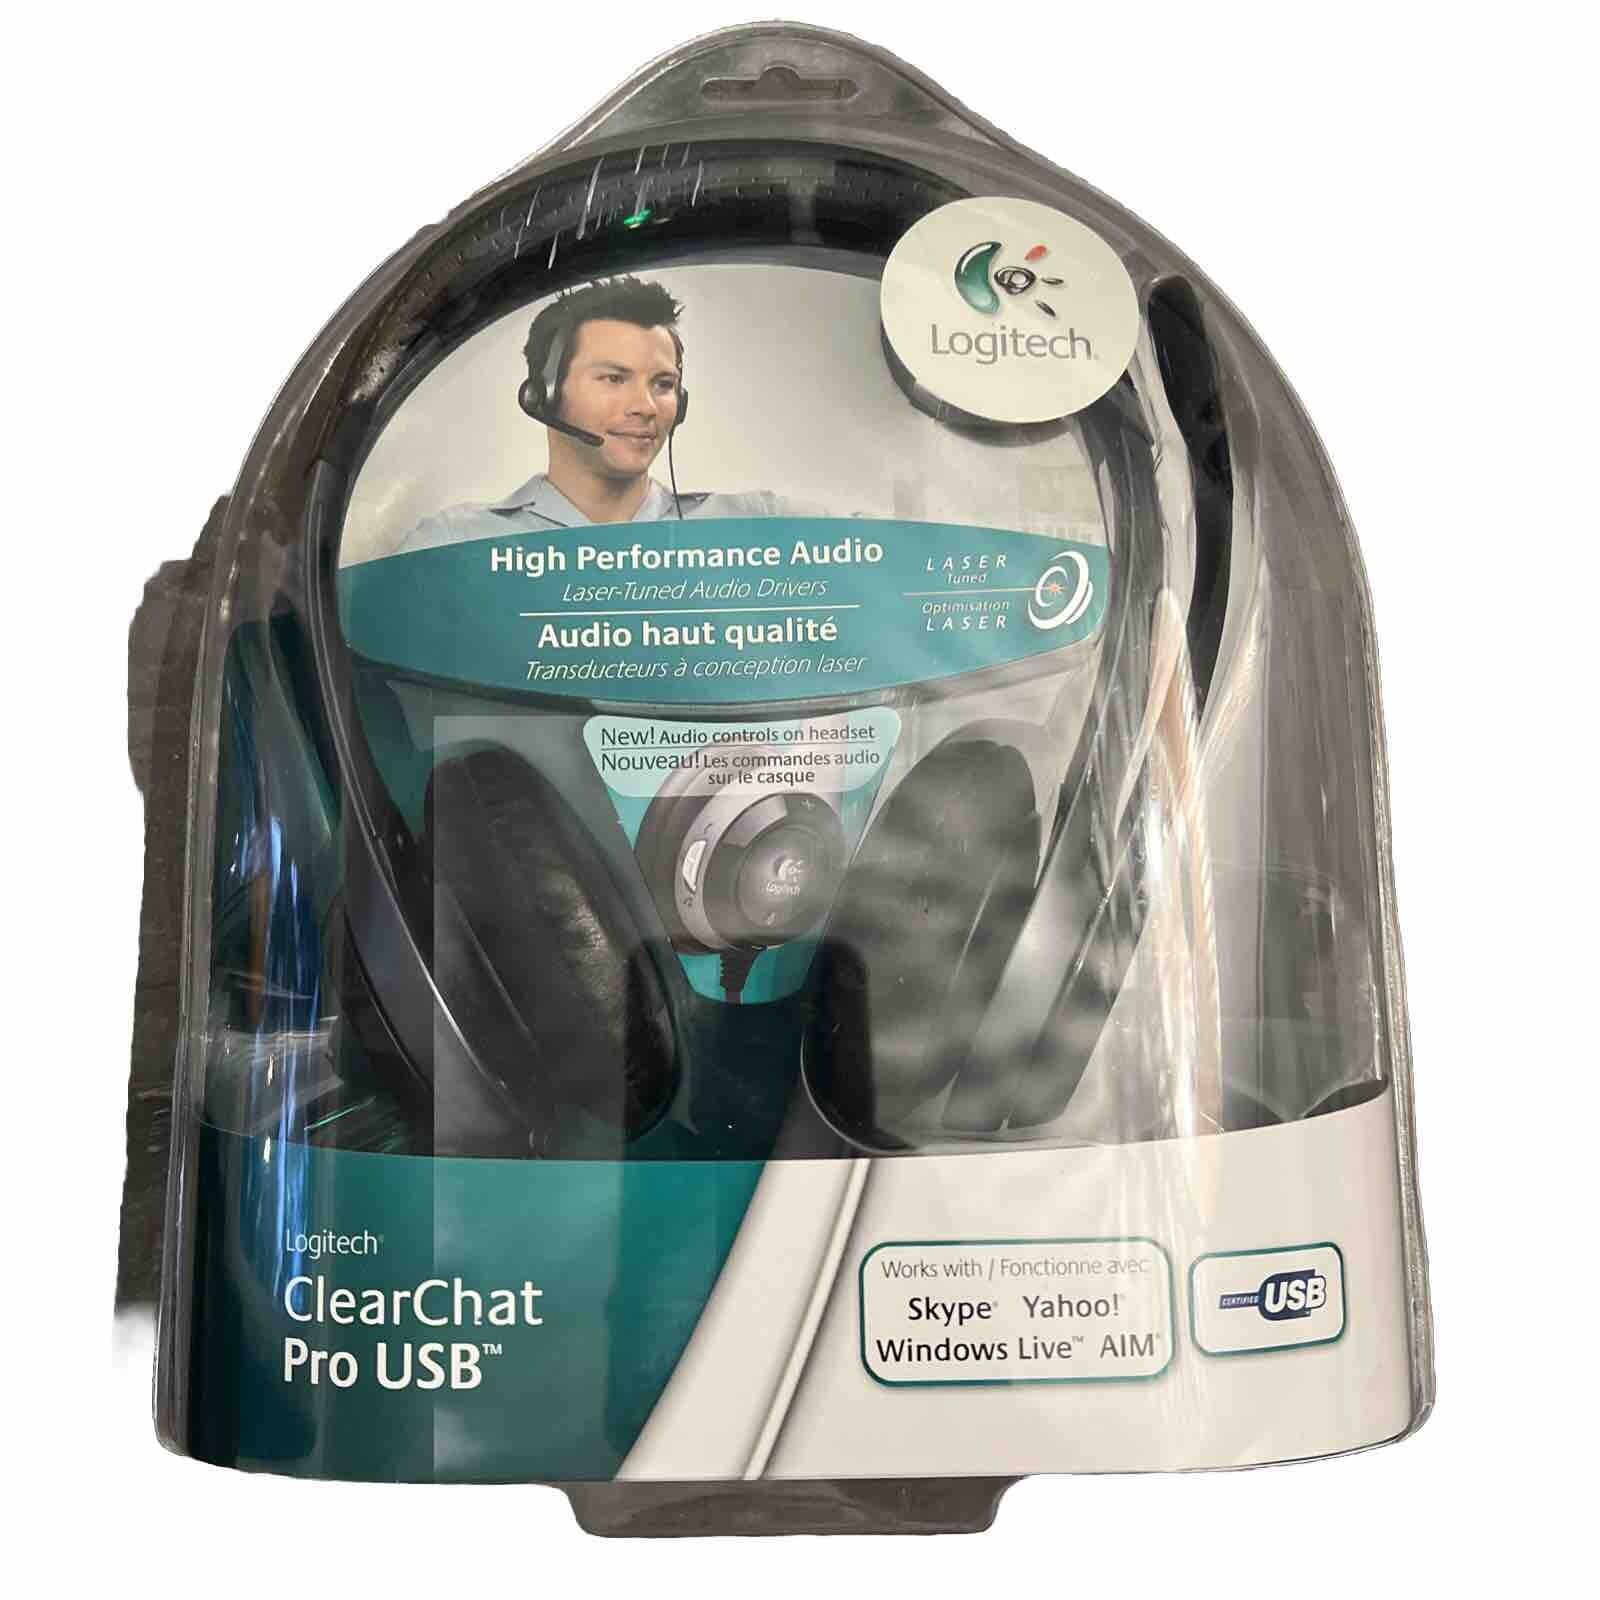 Logitech Clear Chat USB Headset Sealed Package. BRAND  NEW